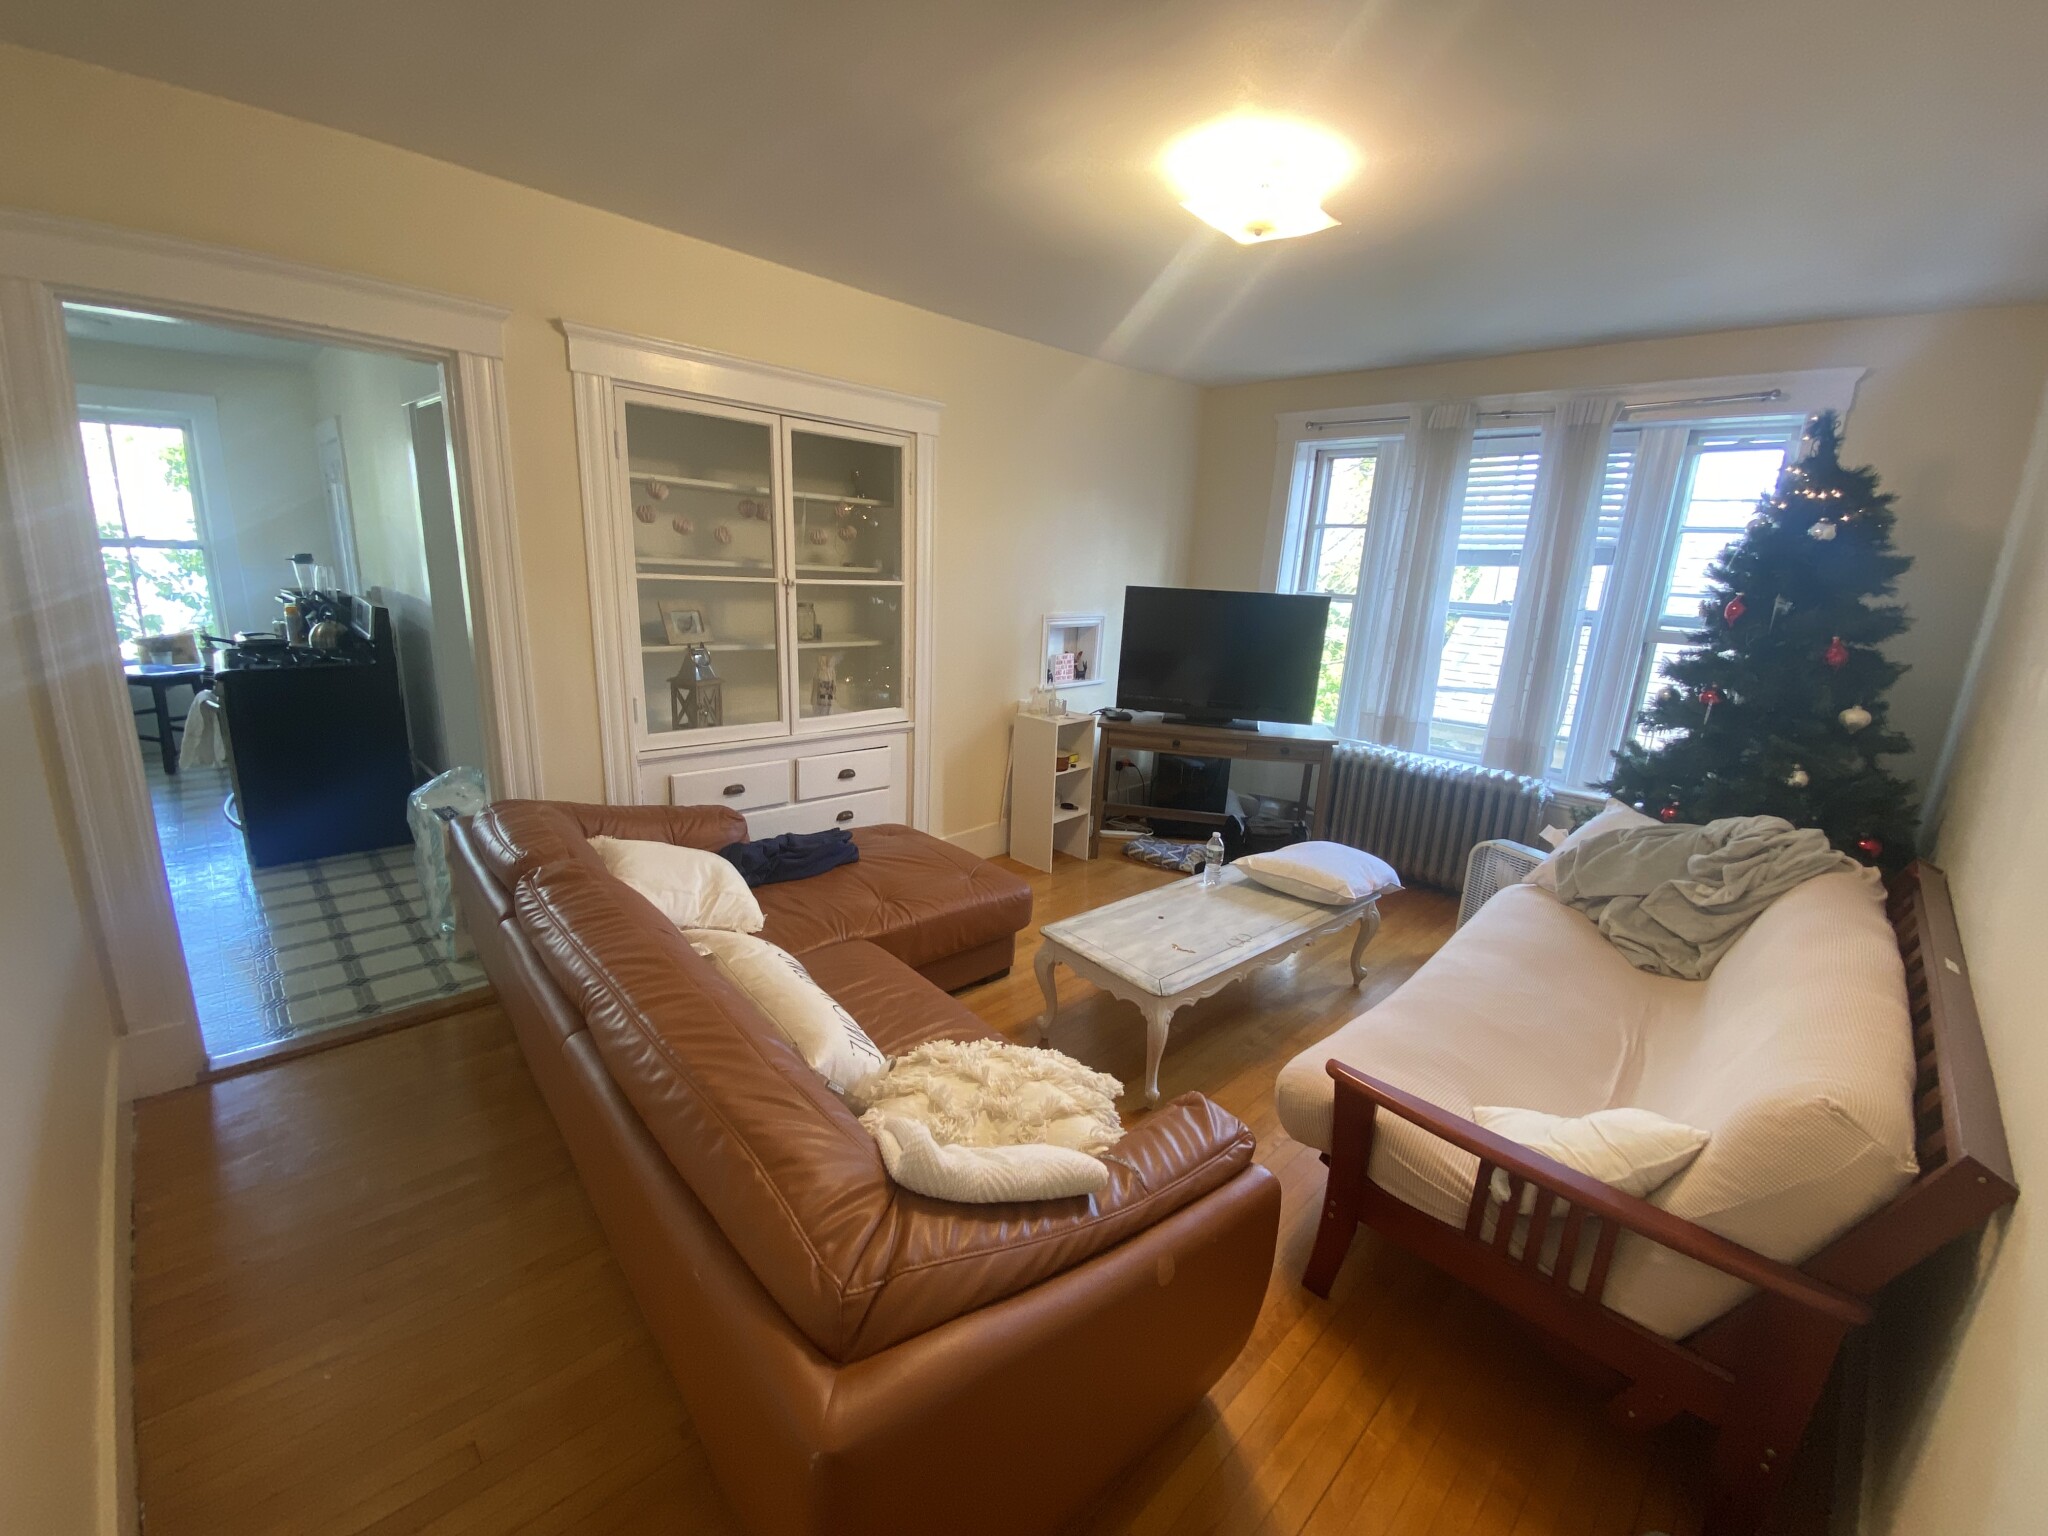 Photos of apartment on Dudley St.,Cambridge MA 02140